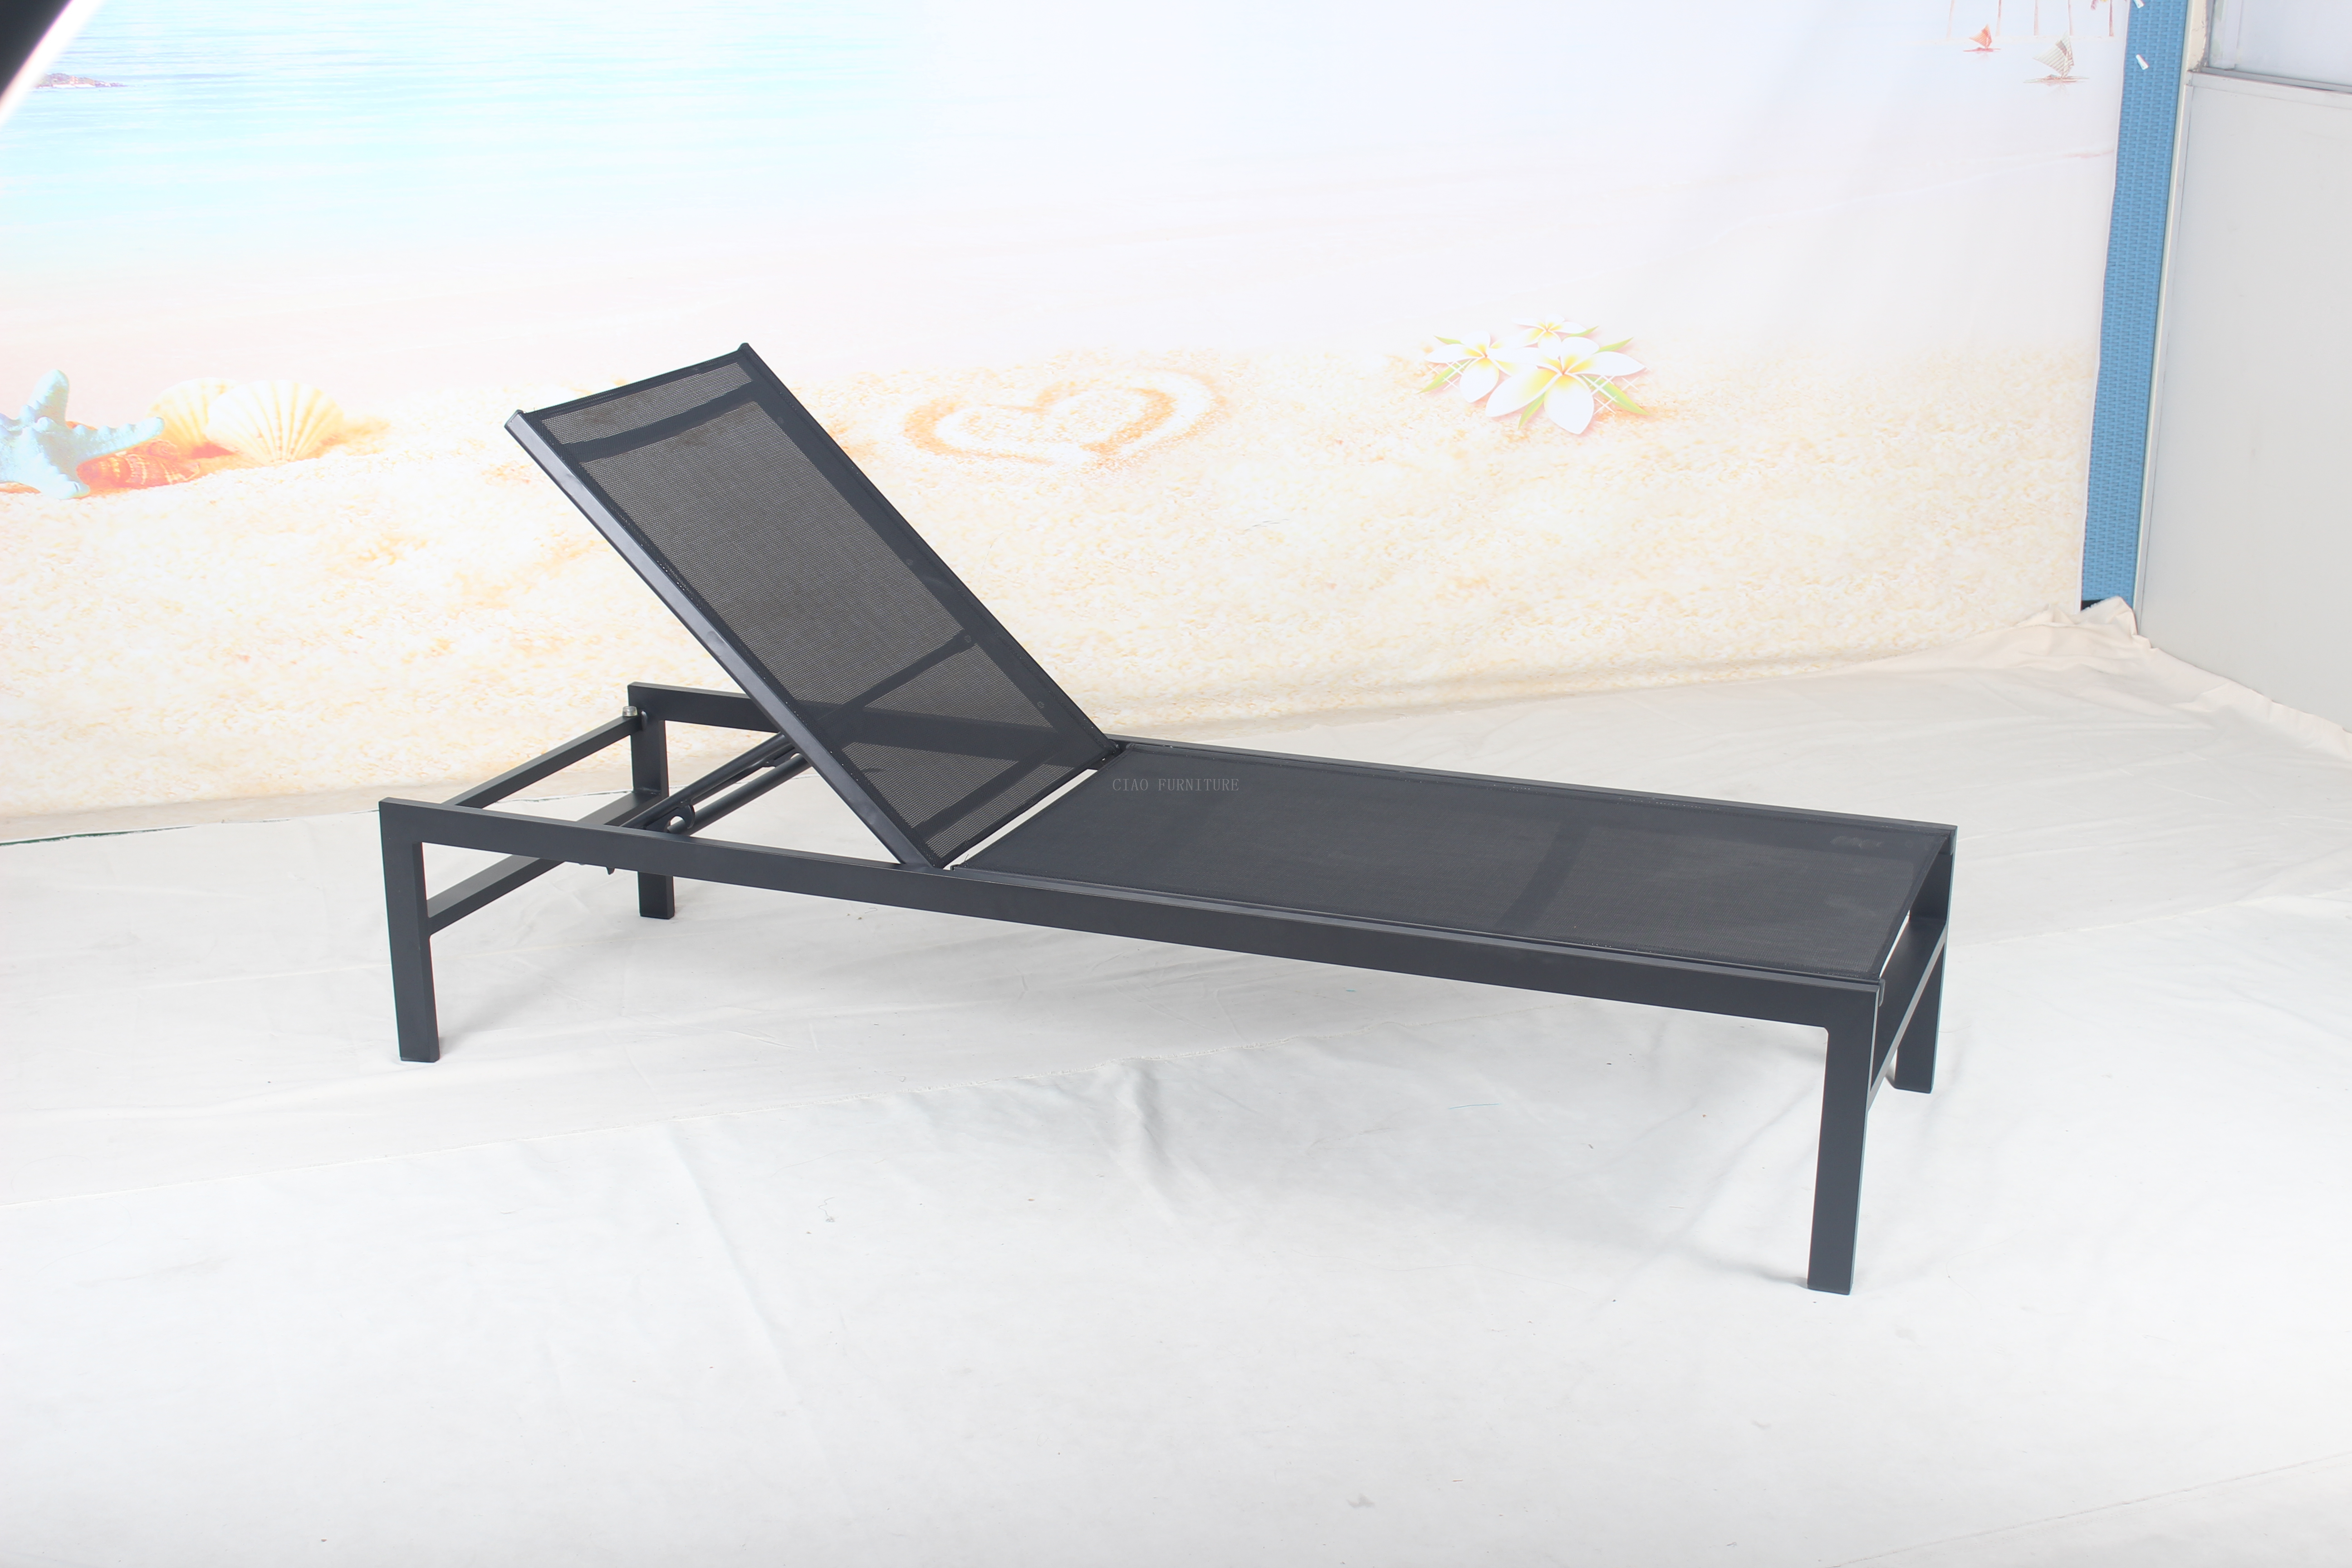 Aluminum frame textile pool chaise lounger